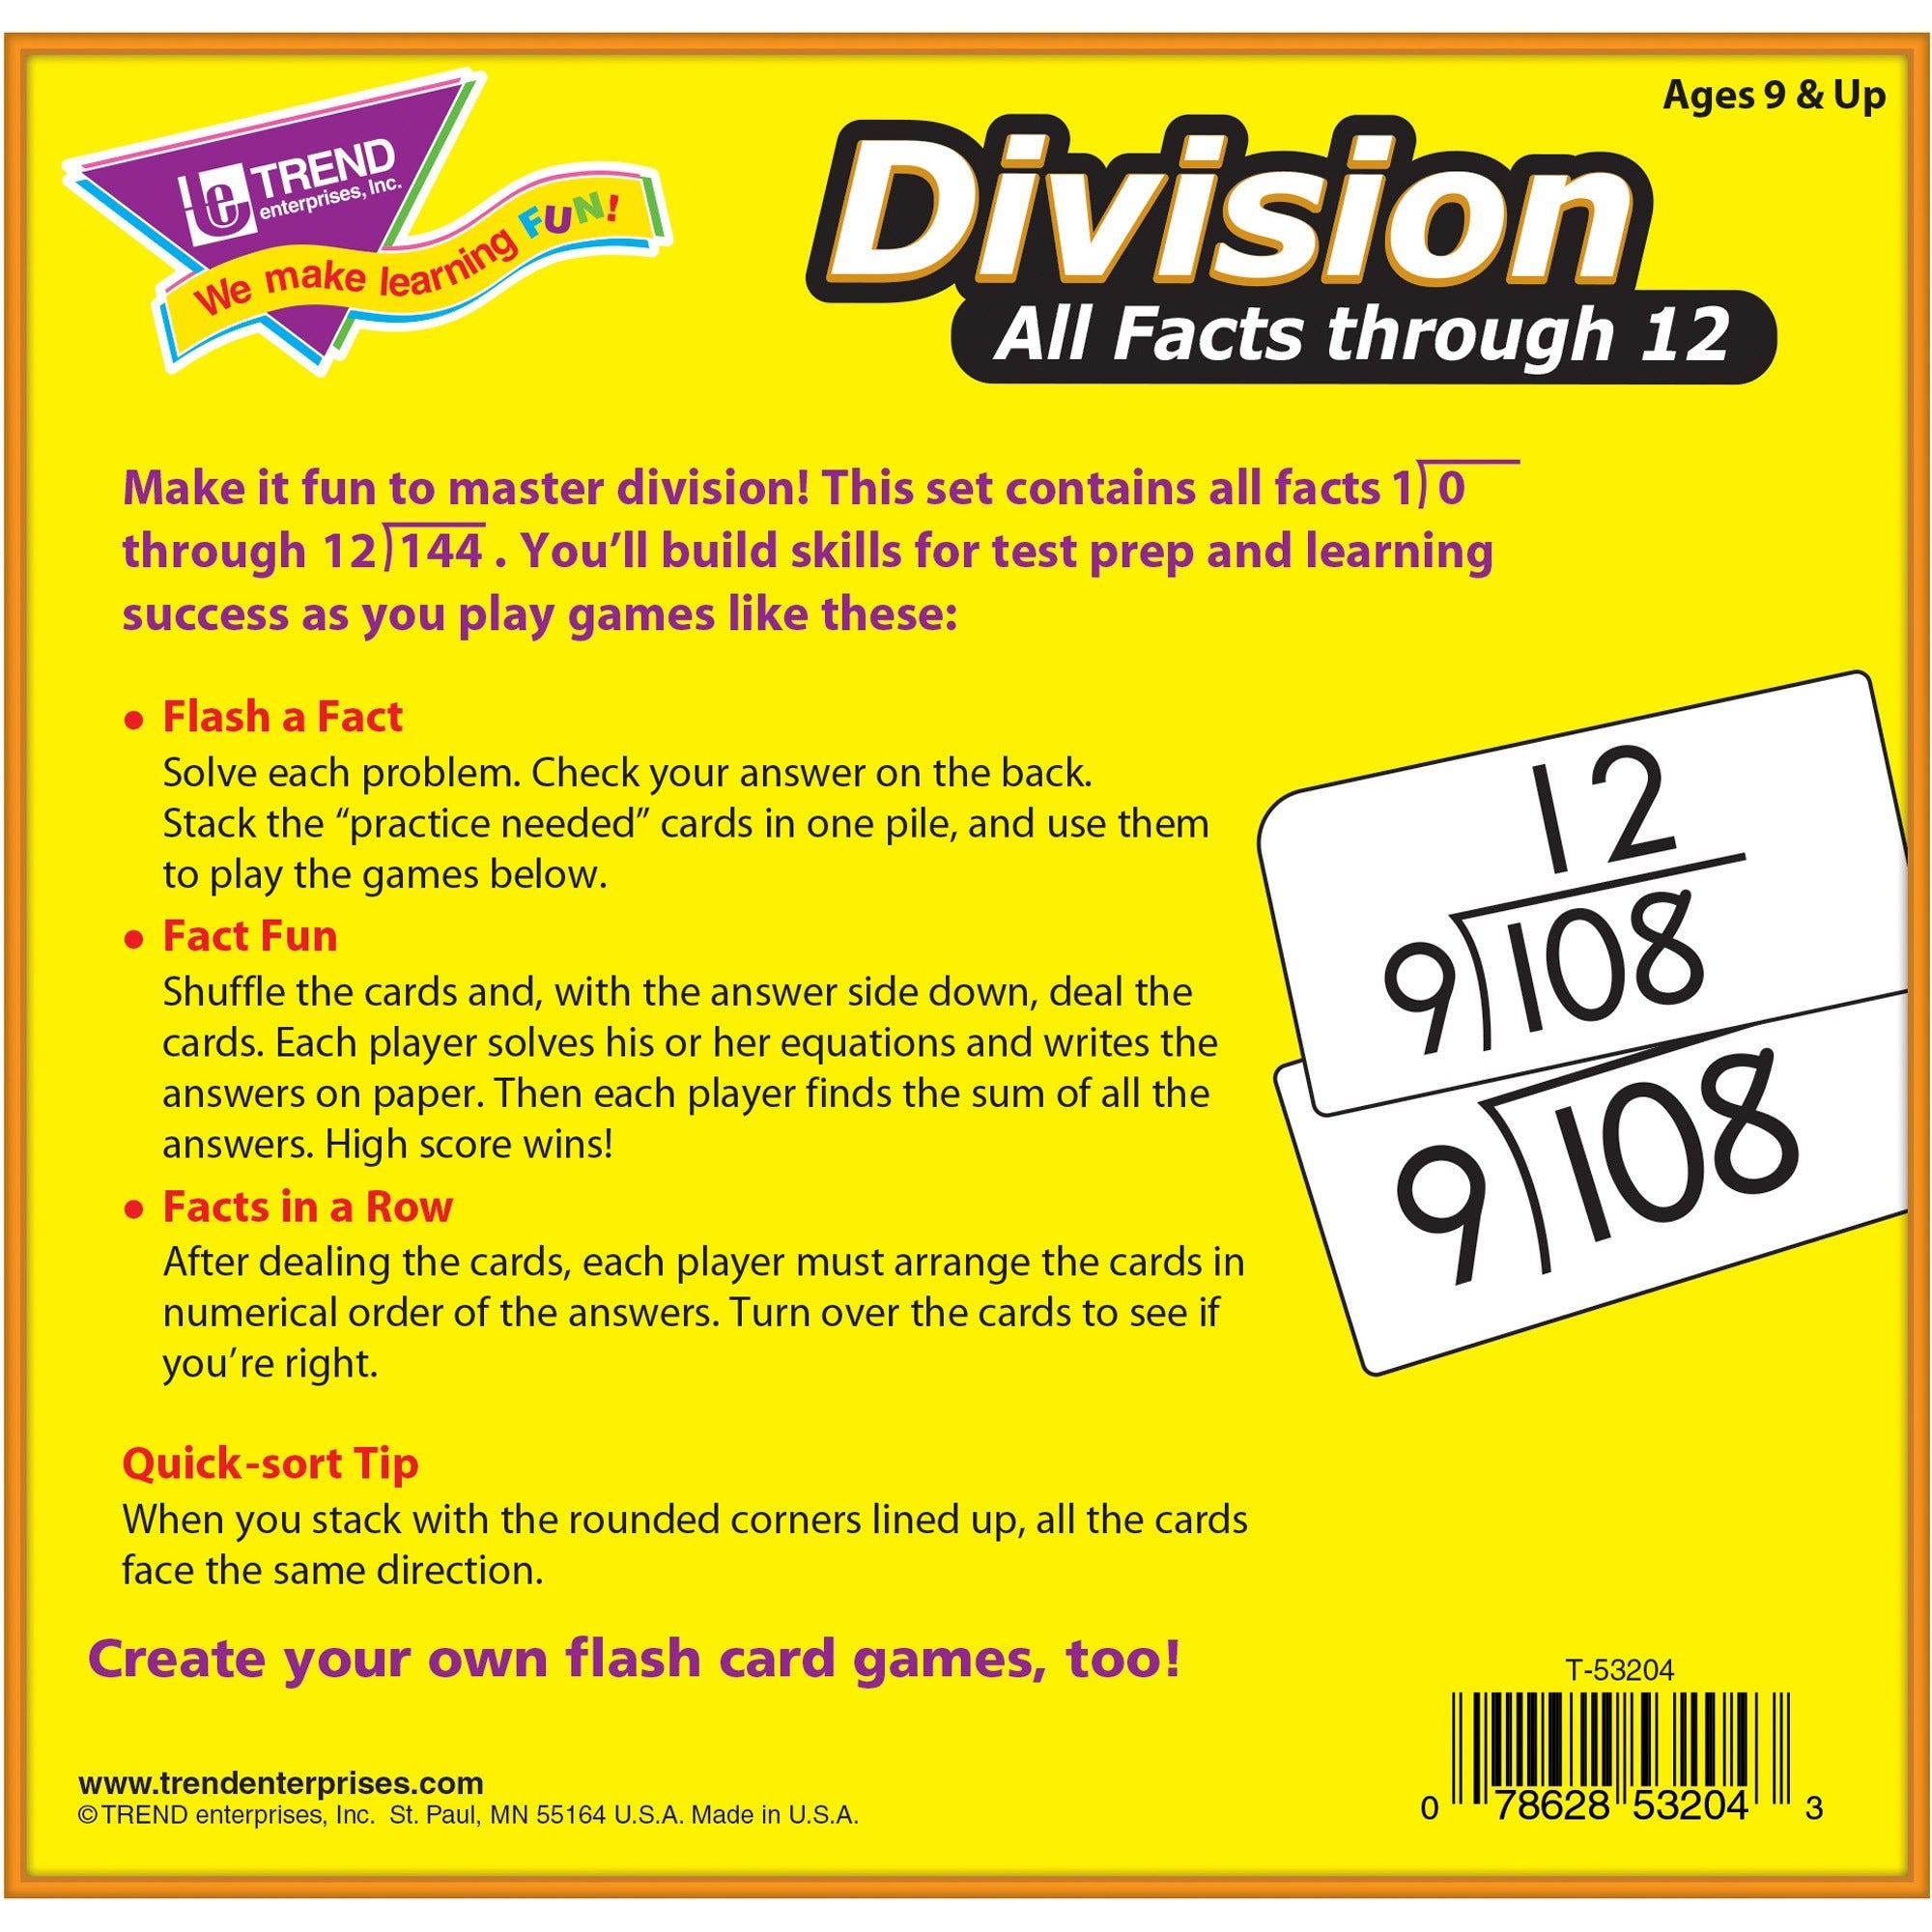 trend-division-all-facts-through-12-flash-cards-theme-subject-learning-skill-learning-division-156-pieces-9+-156-box_tep53204 - 2